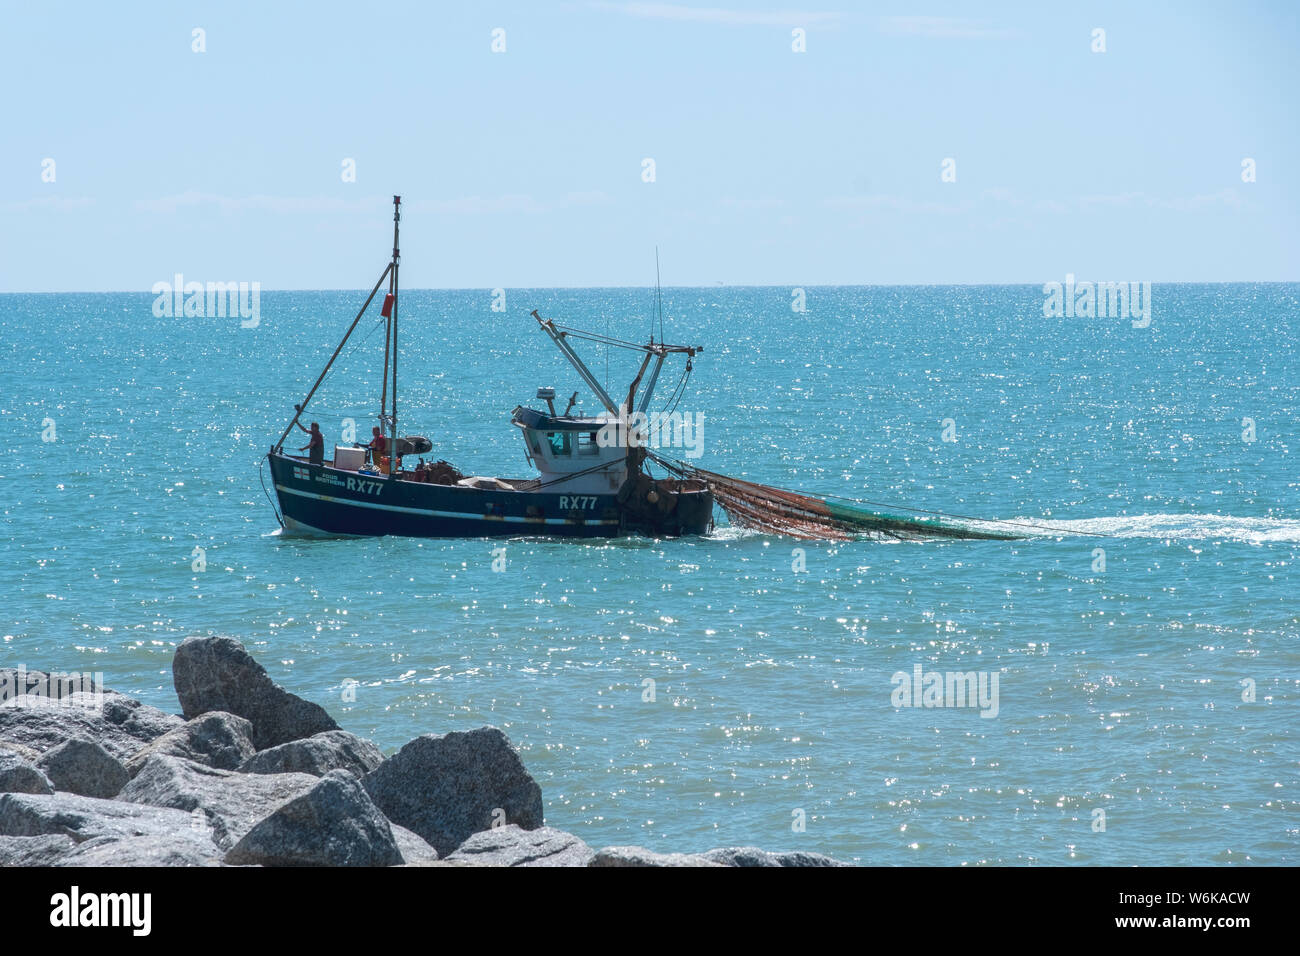 Hastings fishing trawler with trawl nets out close to shore, East Sussex, UK Stock Photo